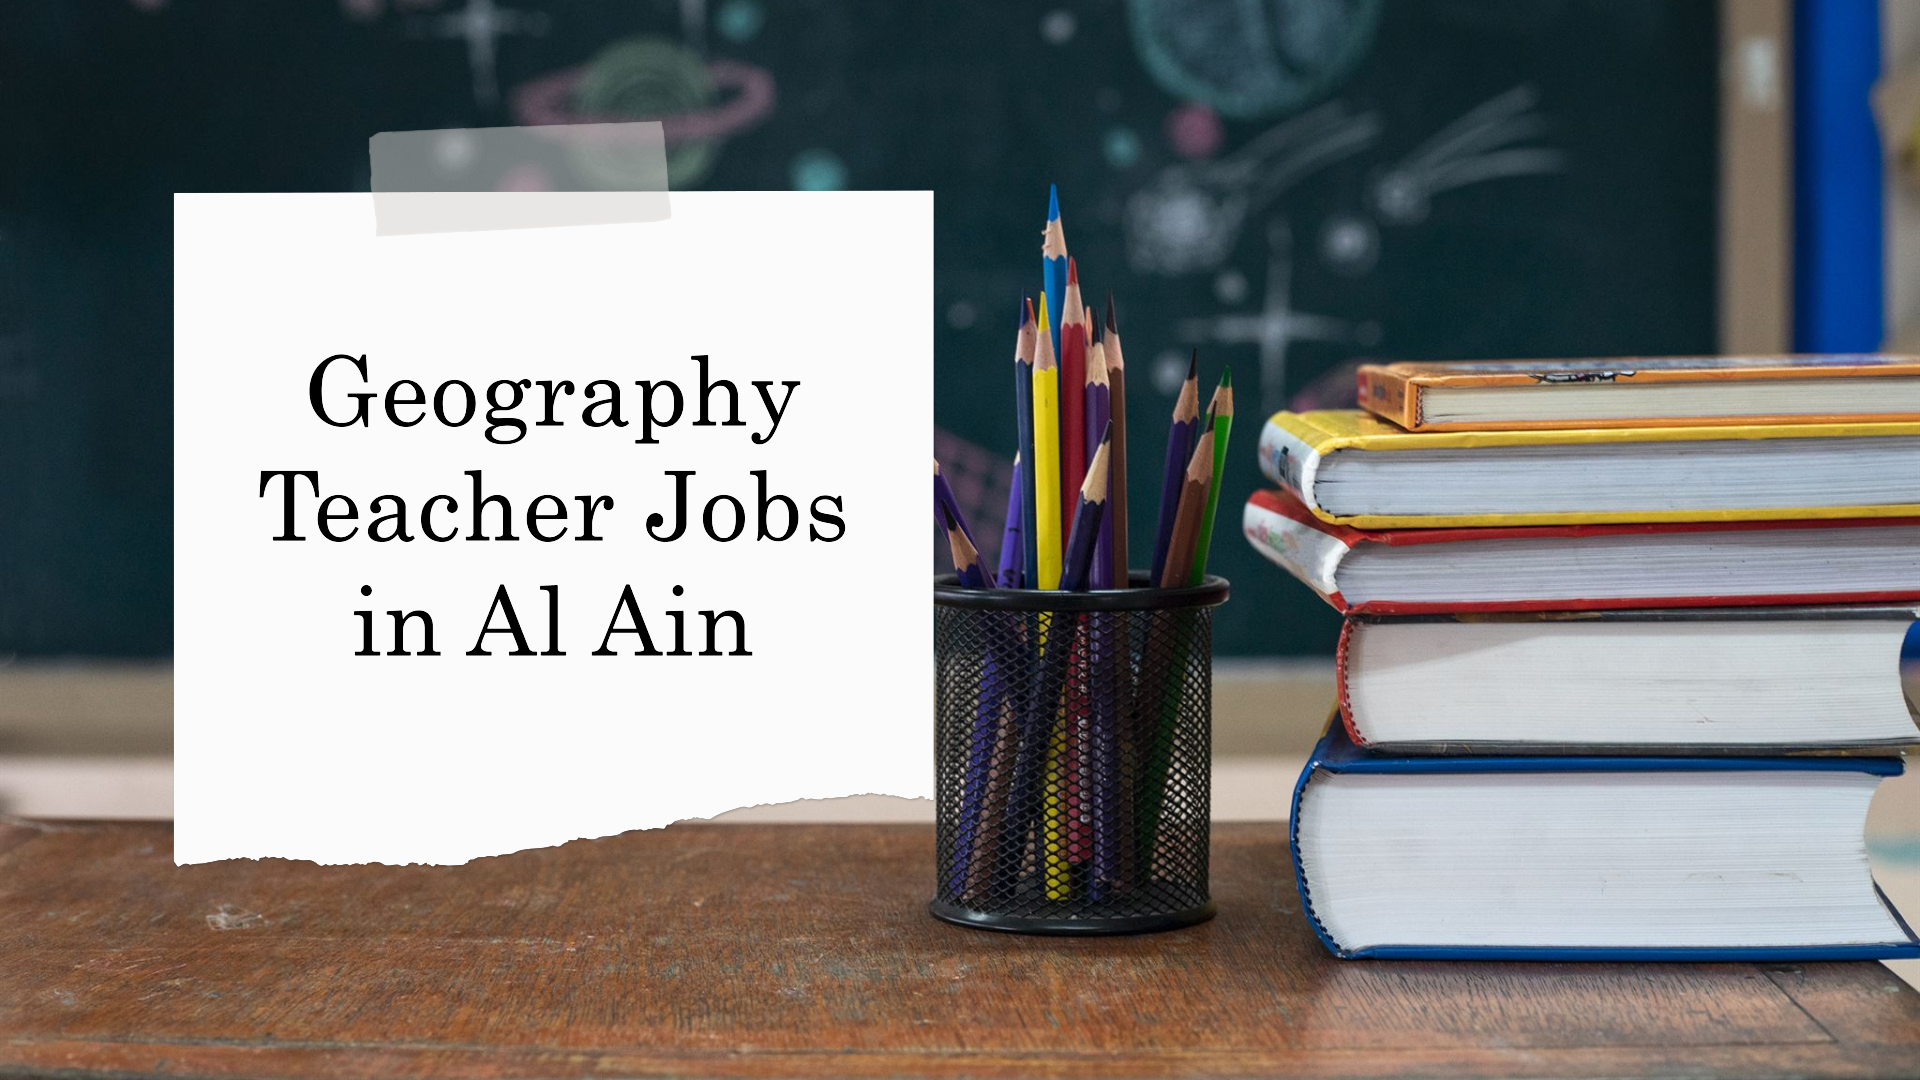 Geography Teacher jobs in Al Ain for all nationalities